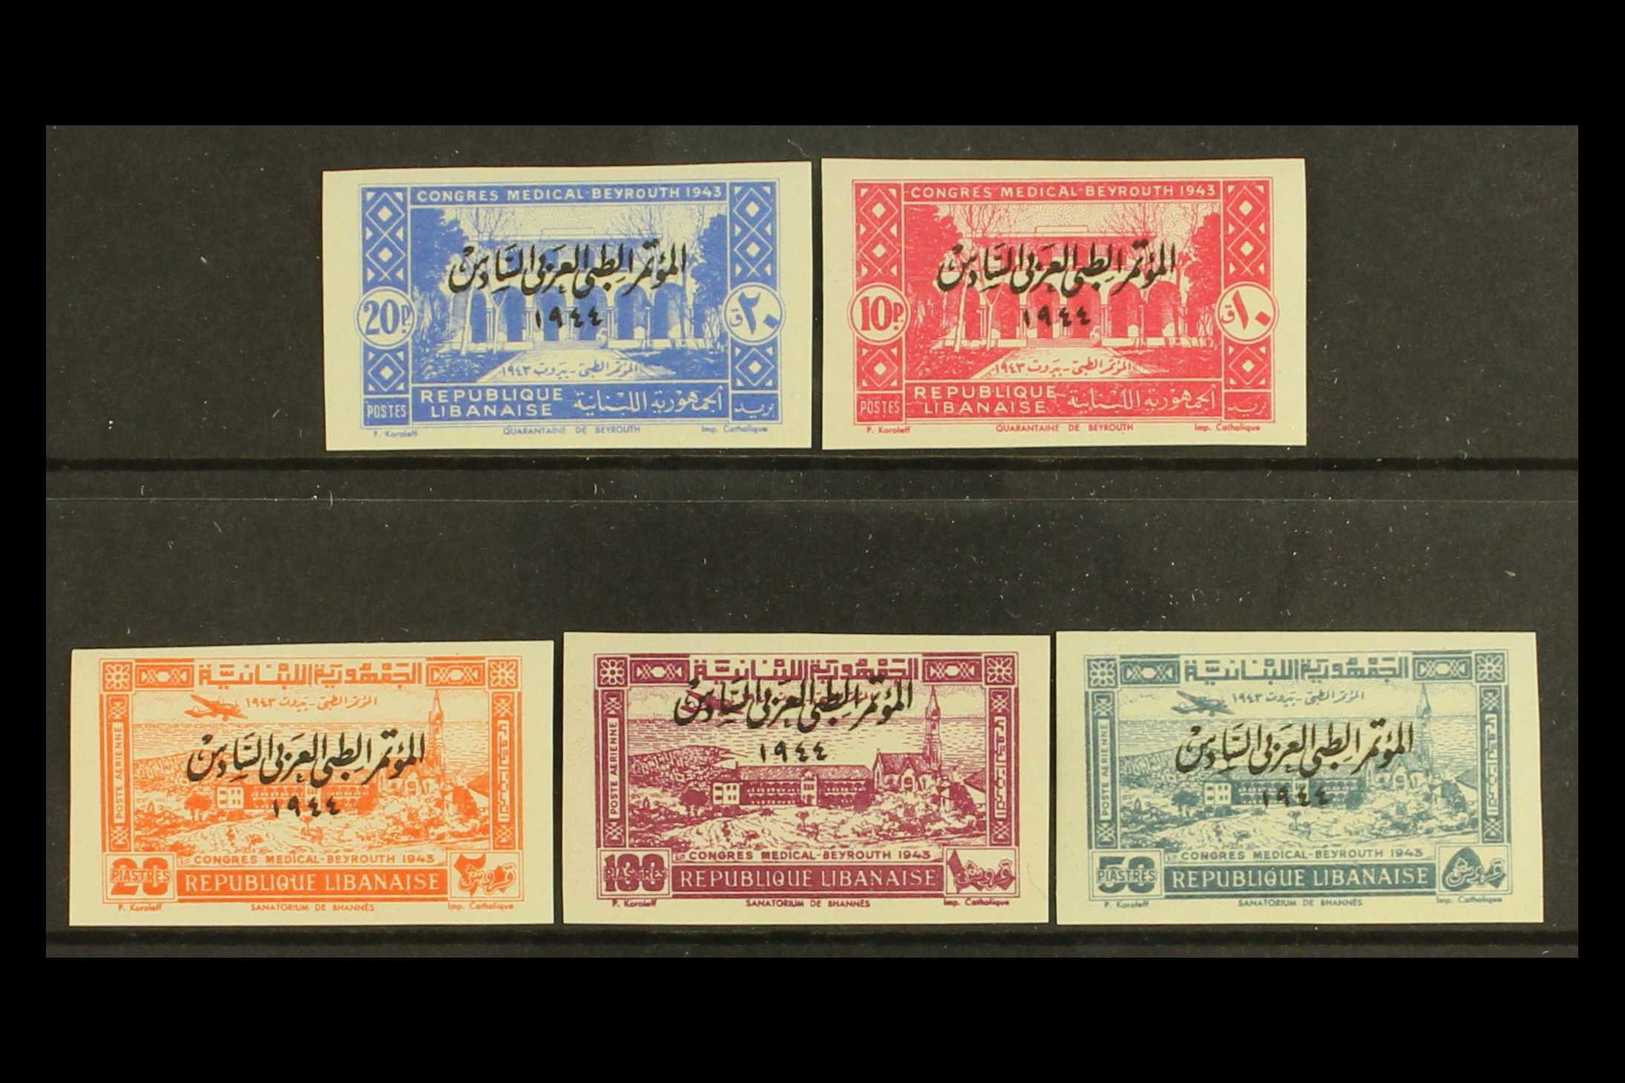 1943  Beirut Medical Congress Overprinted Postage And Airmail IMPERFORATE Complete Set, Maury 187/188 & 88/90, Never Hin - Líbano